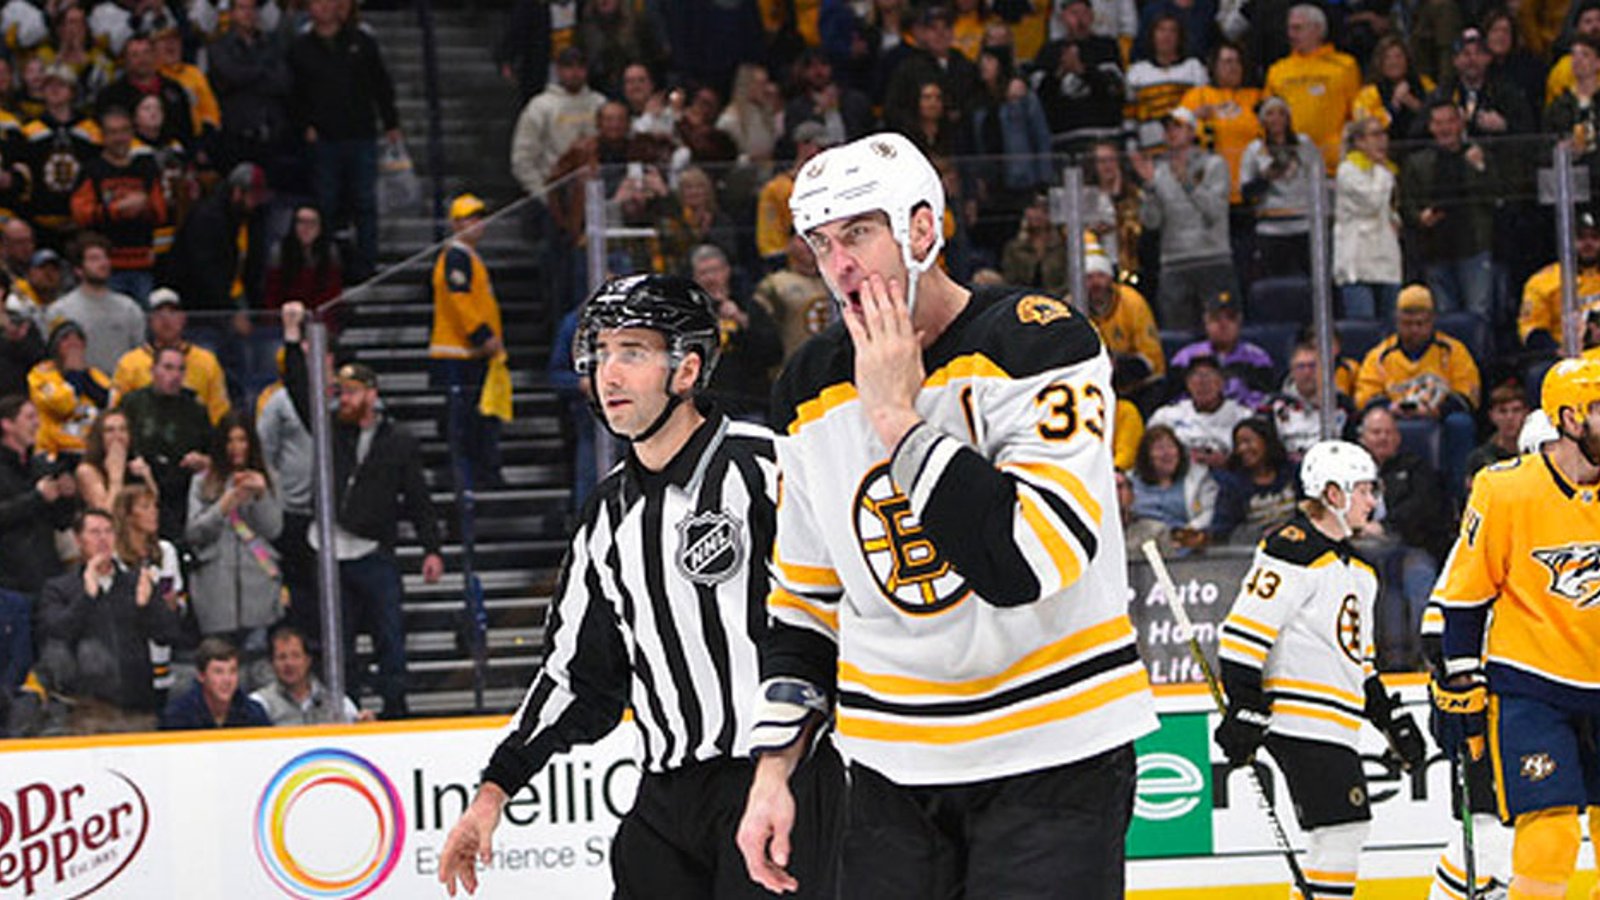 Zdeno Chara hopes to get back in the lineup right away